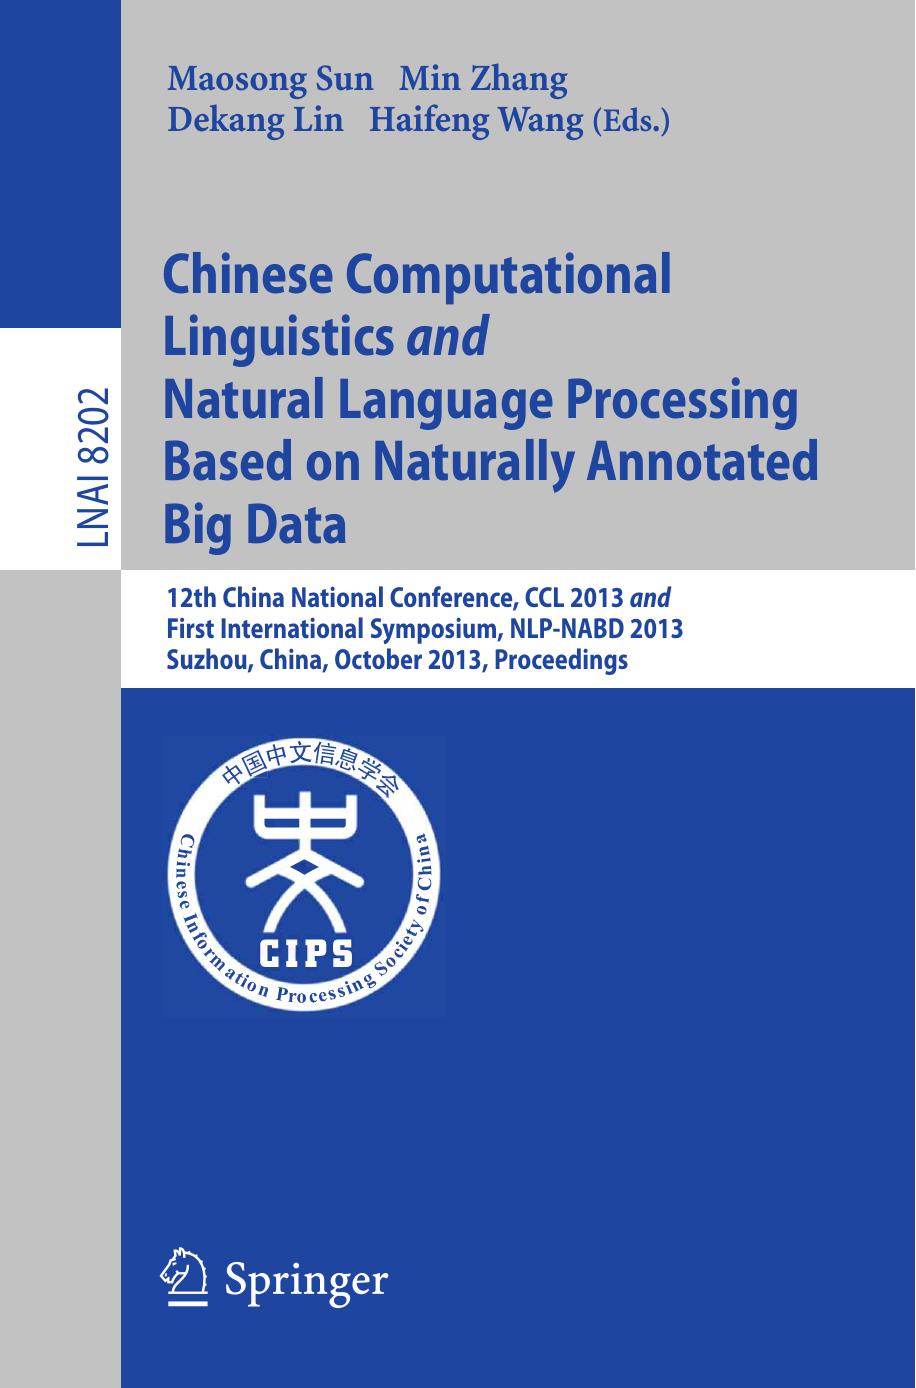 Chinese Computational Linguistics and Natural Language Processing Based on Naturally Annotated Big Data: 12th China National Conference, CCL 2013 and First International Symposium, NLP-NABD 2013, Suzhou, China, October 10-12, 2013, Proceedings